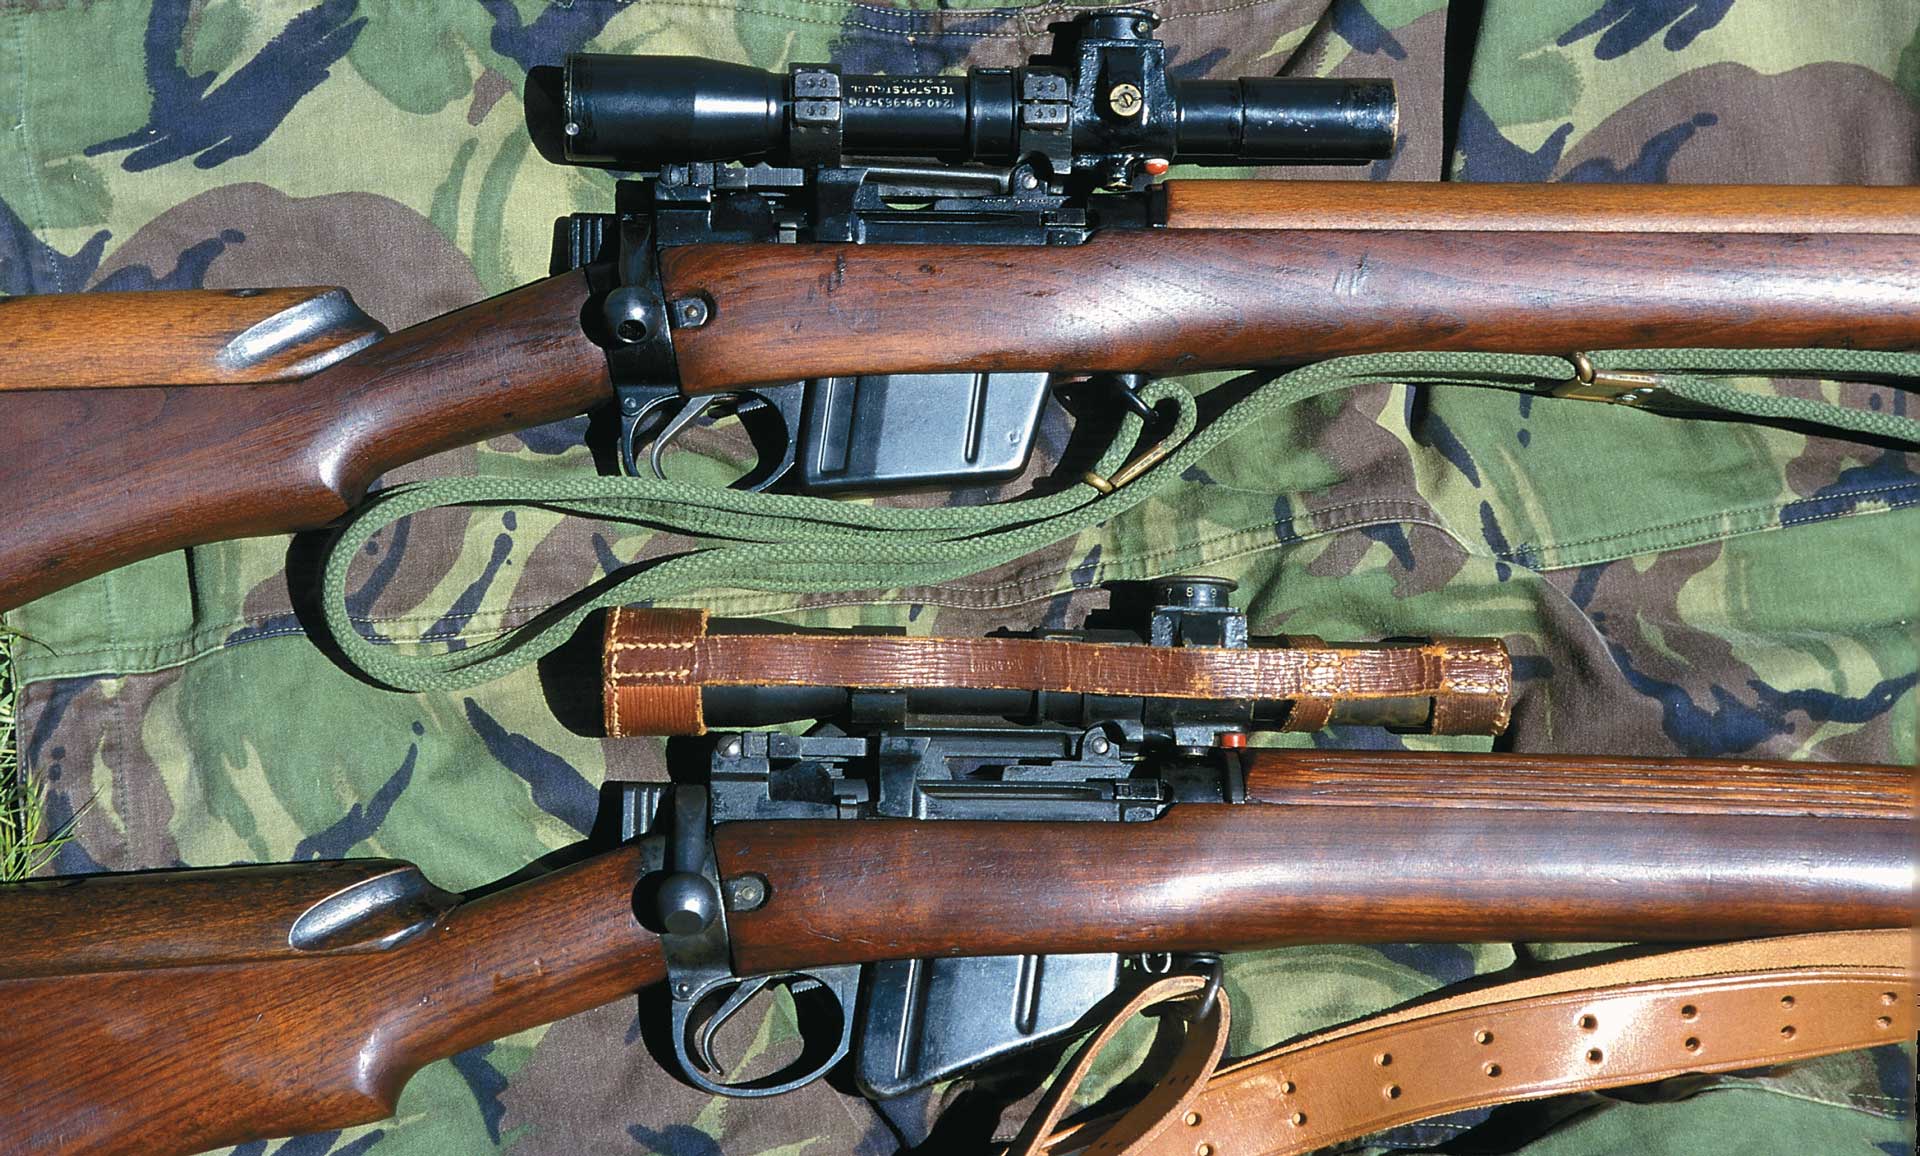 Ares is presenting the Lee Enfield No.4 Mk.I and the L42A1